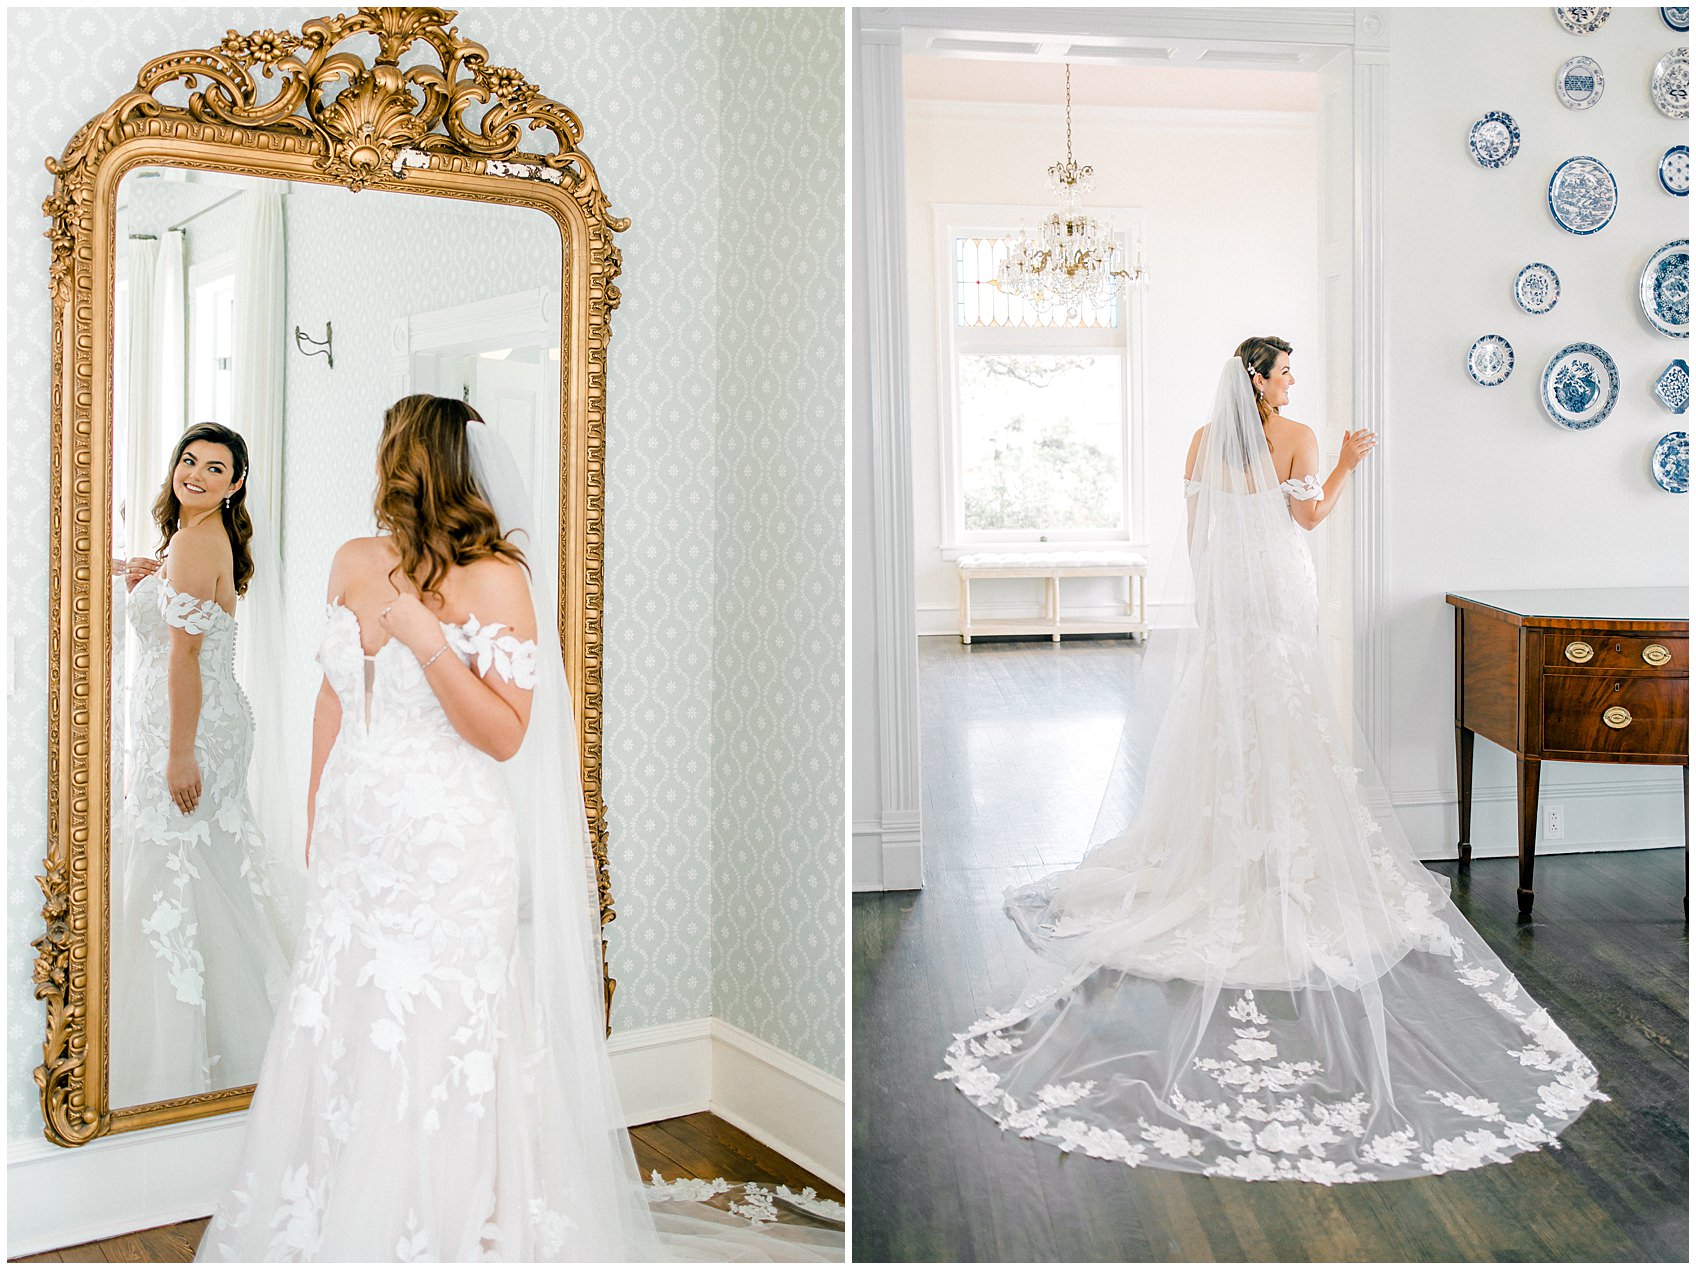 Woodbine Mansion Spring Bridal wedding Photos by Allison Jeffers Photography 0003